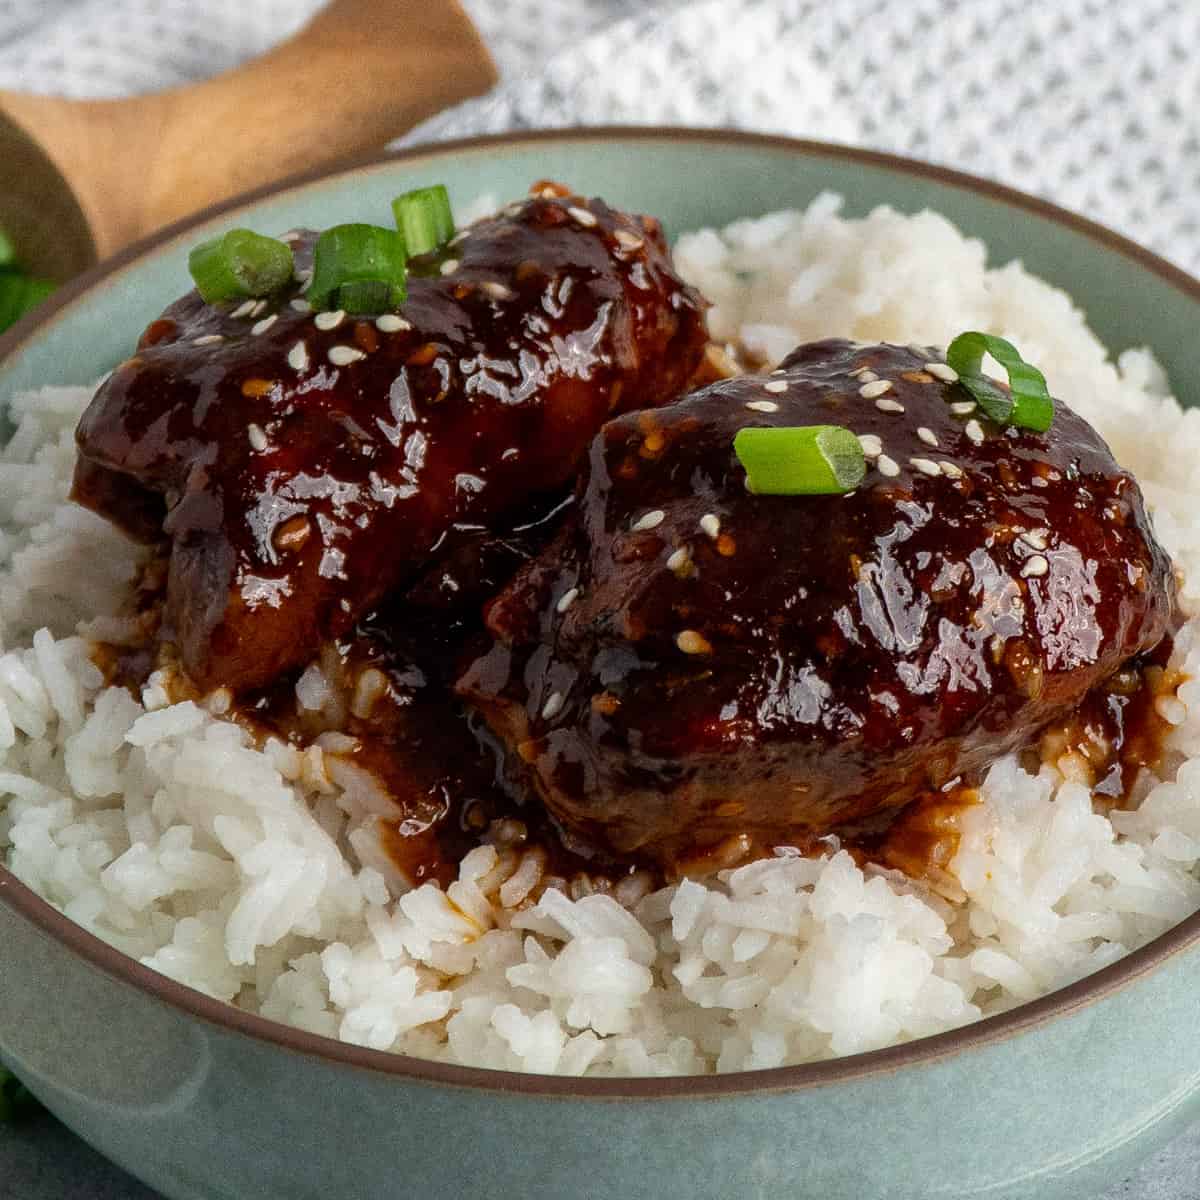 Honey garlic chicken thighs over a bowl of rice.